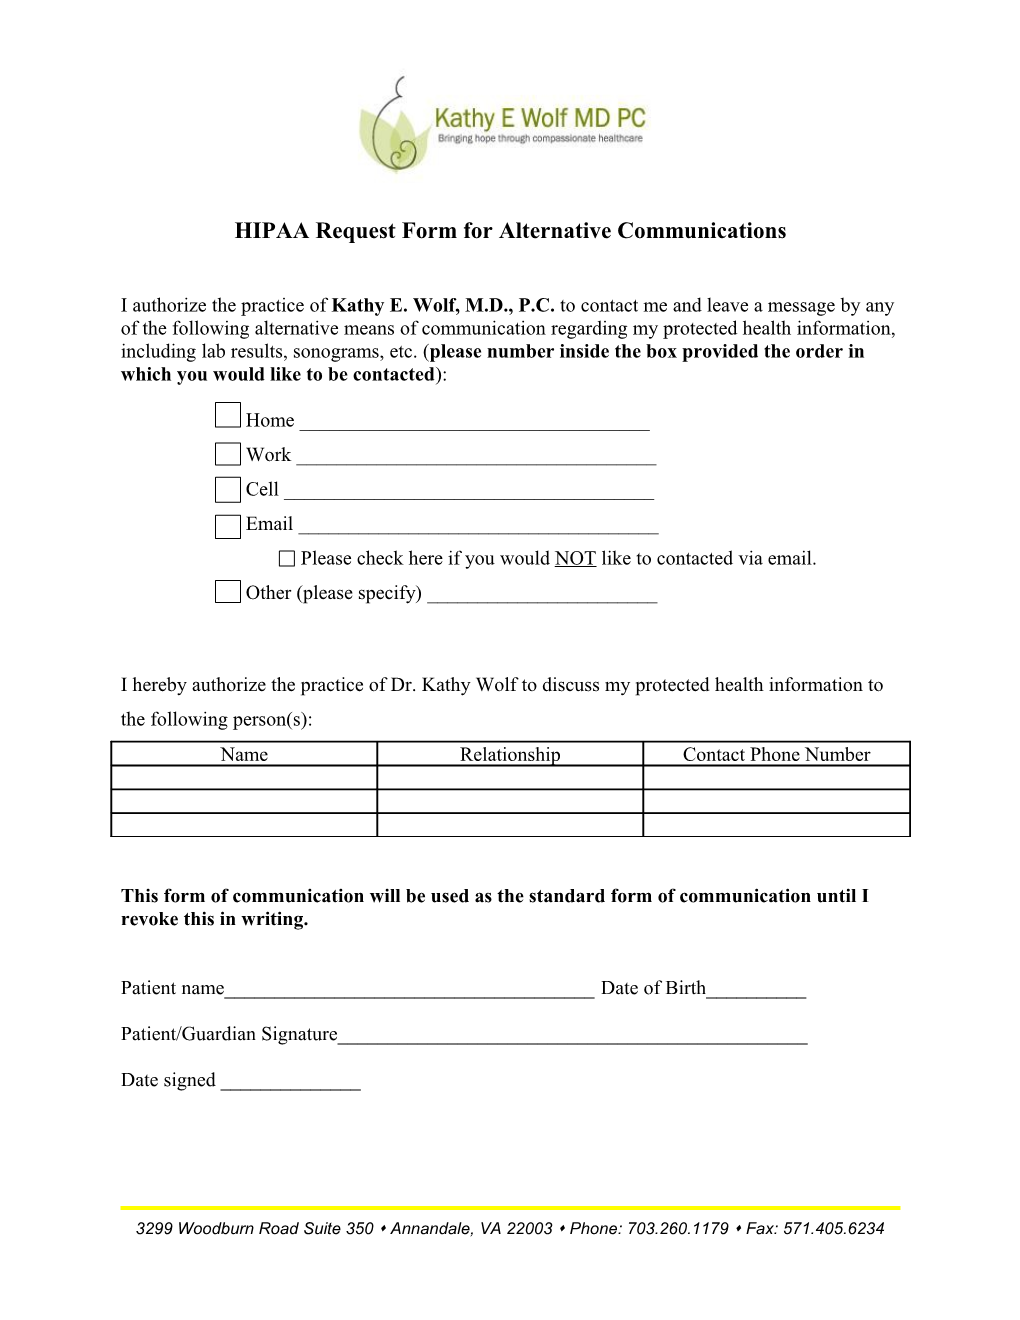 HIPAA Request Form for Alternative Communications